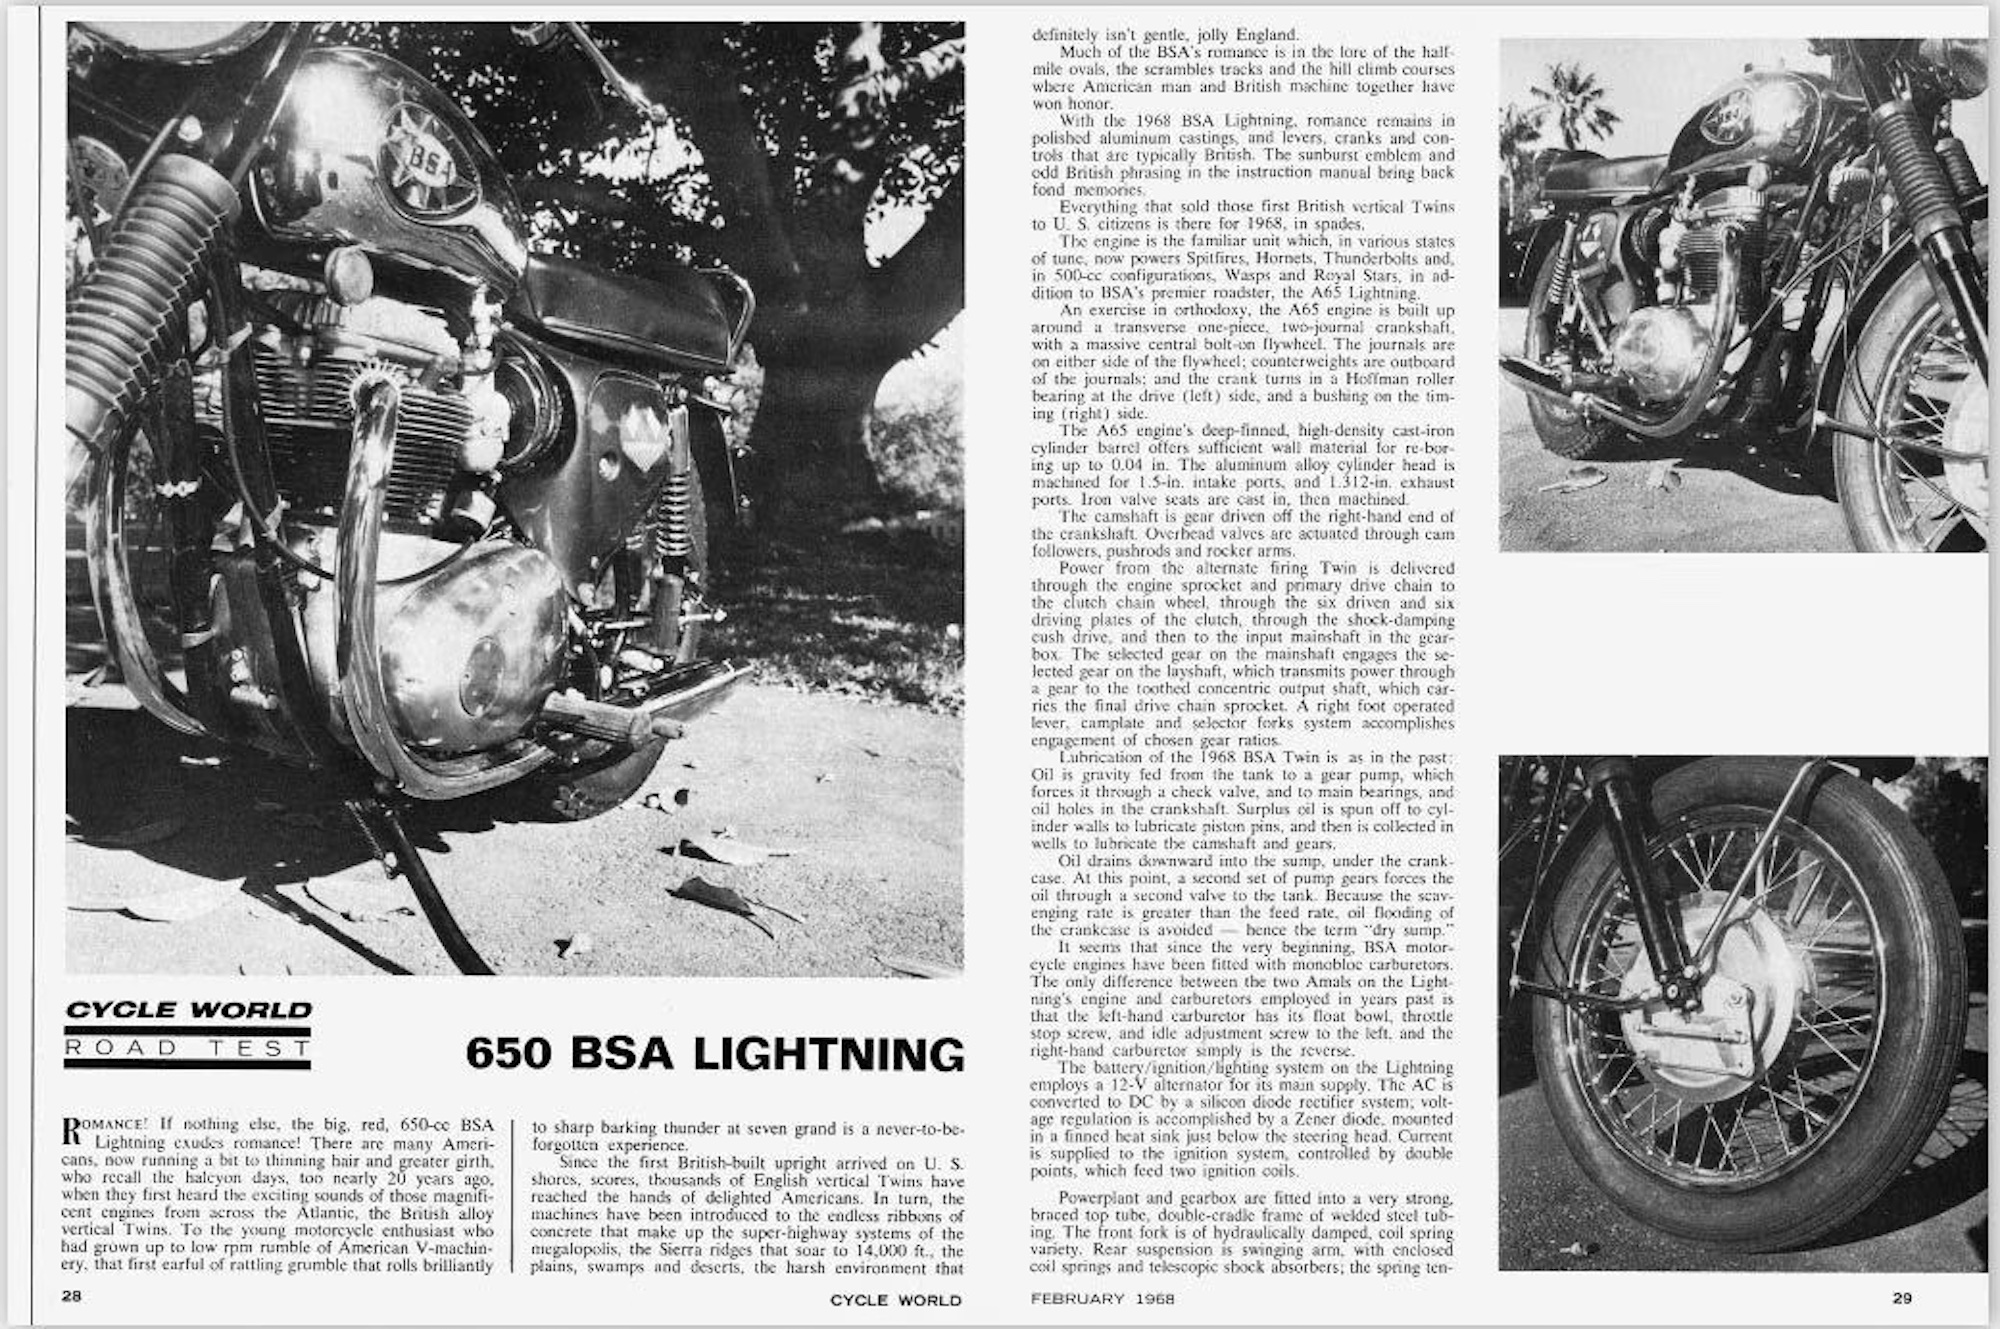 A view of BSA's Lightning, showing coverage from CycleWorld. Media sourced from CycleWorld.